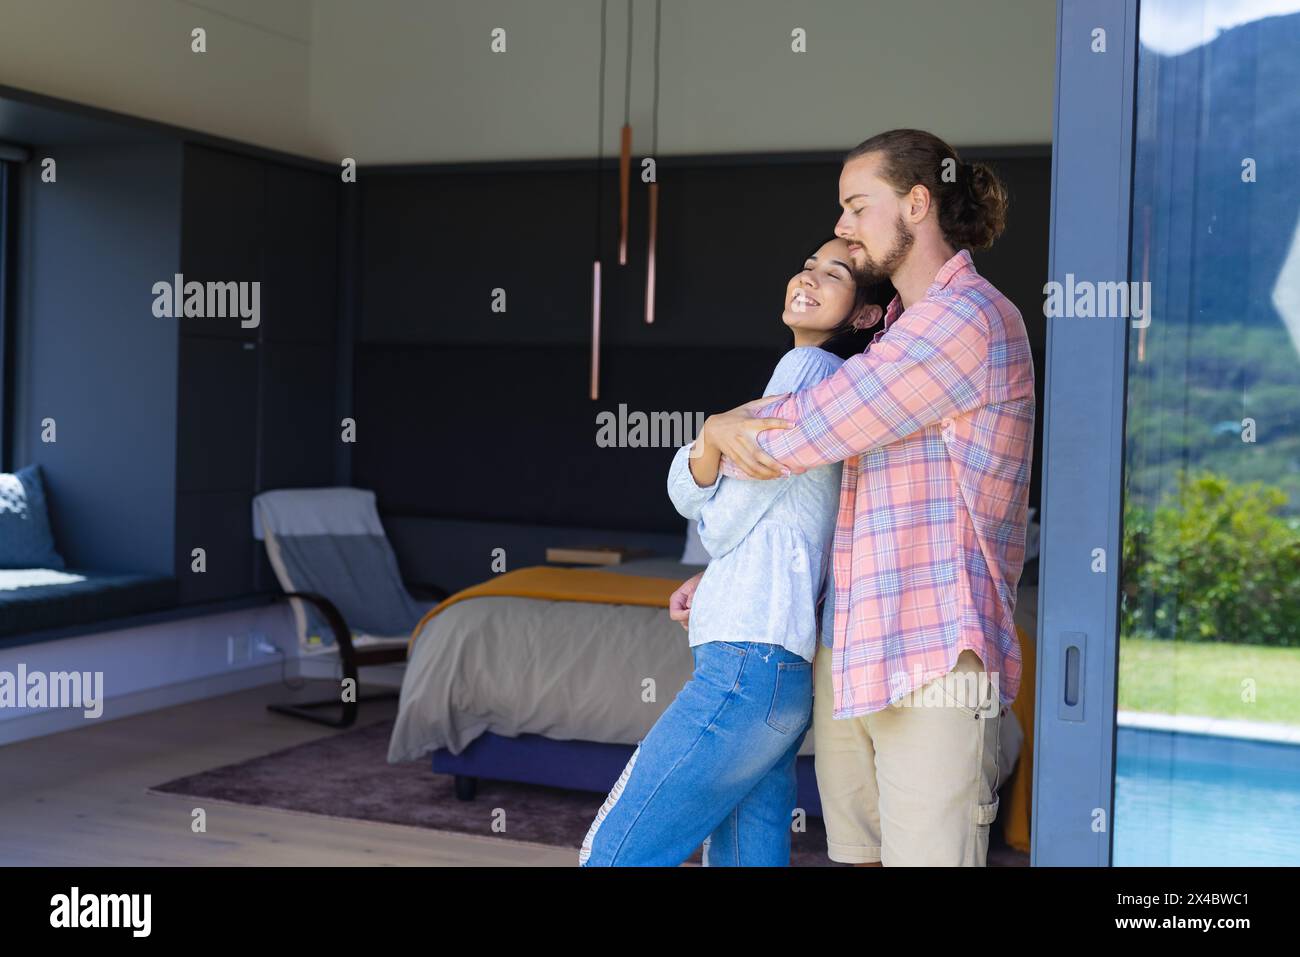 Diverse couple embracing in modern bedroom at home, copy space. She has curly brown hair, he has a beard and long hair, unaltered Stock Photo